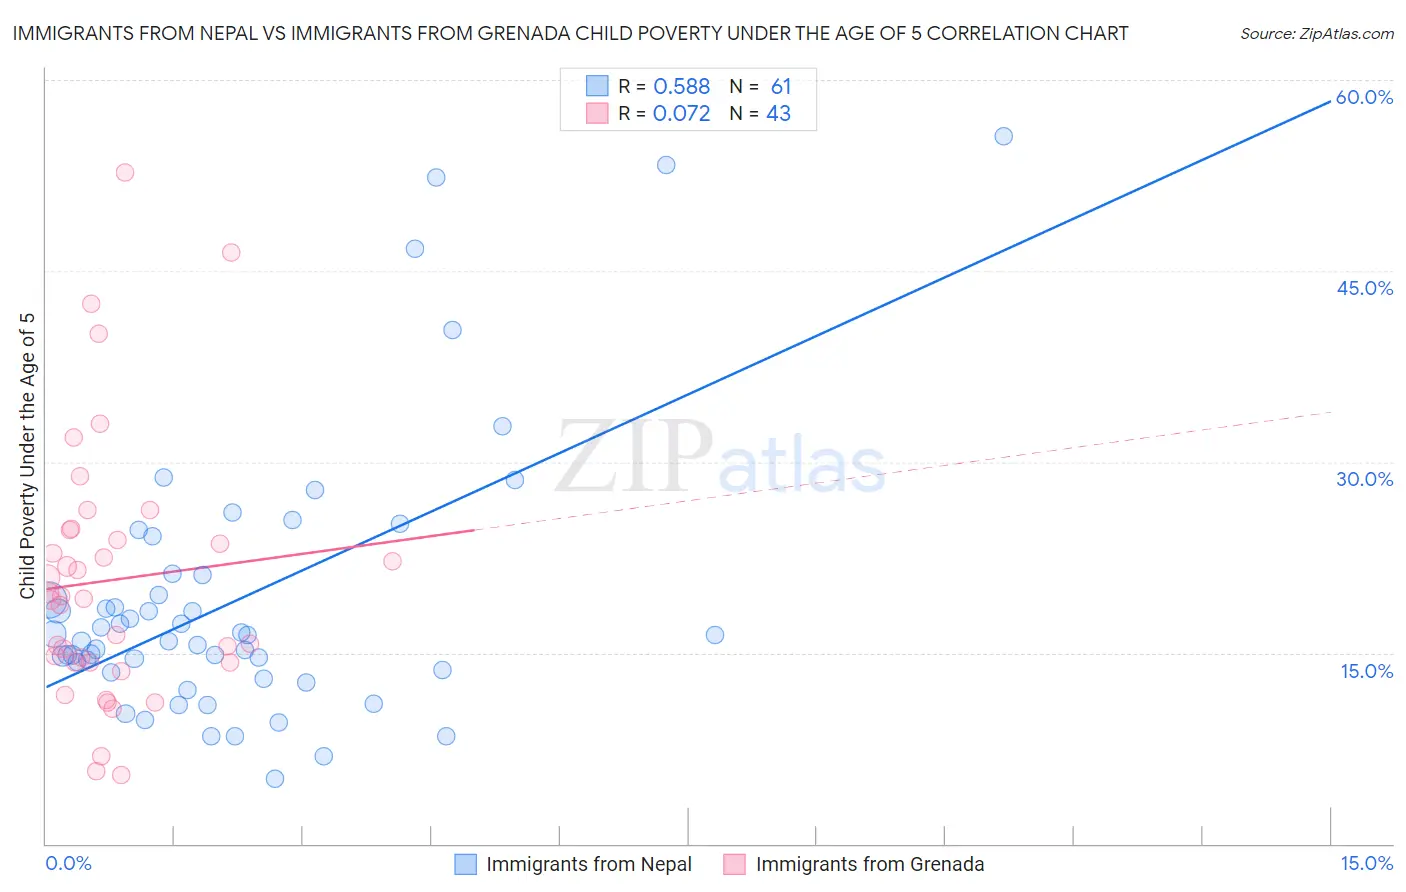 Immigrants from Nepal vs Immigrants from Grenada Child Poverty Under the Age of 5